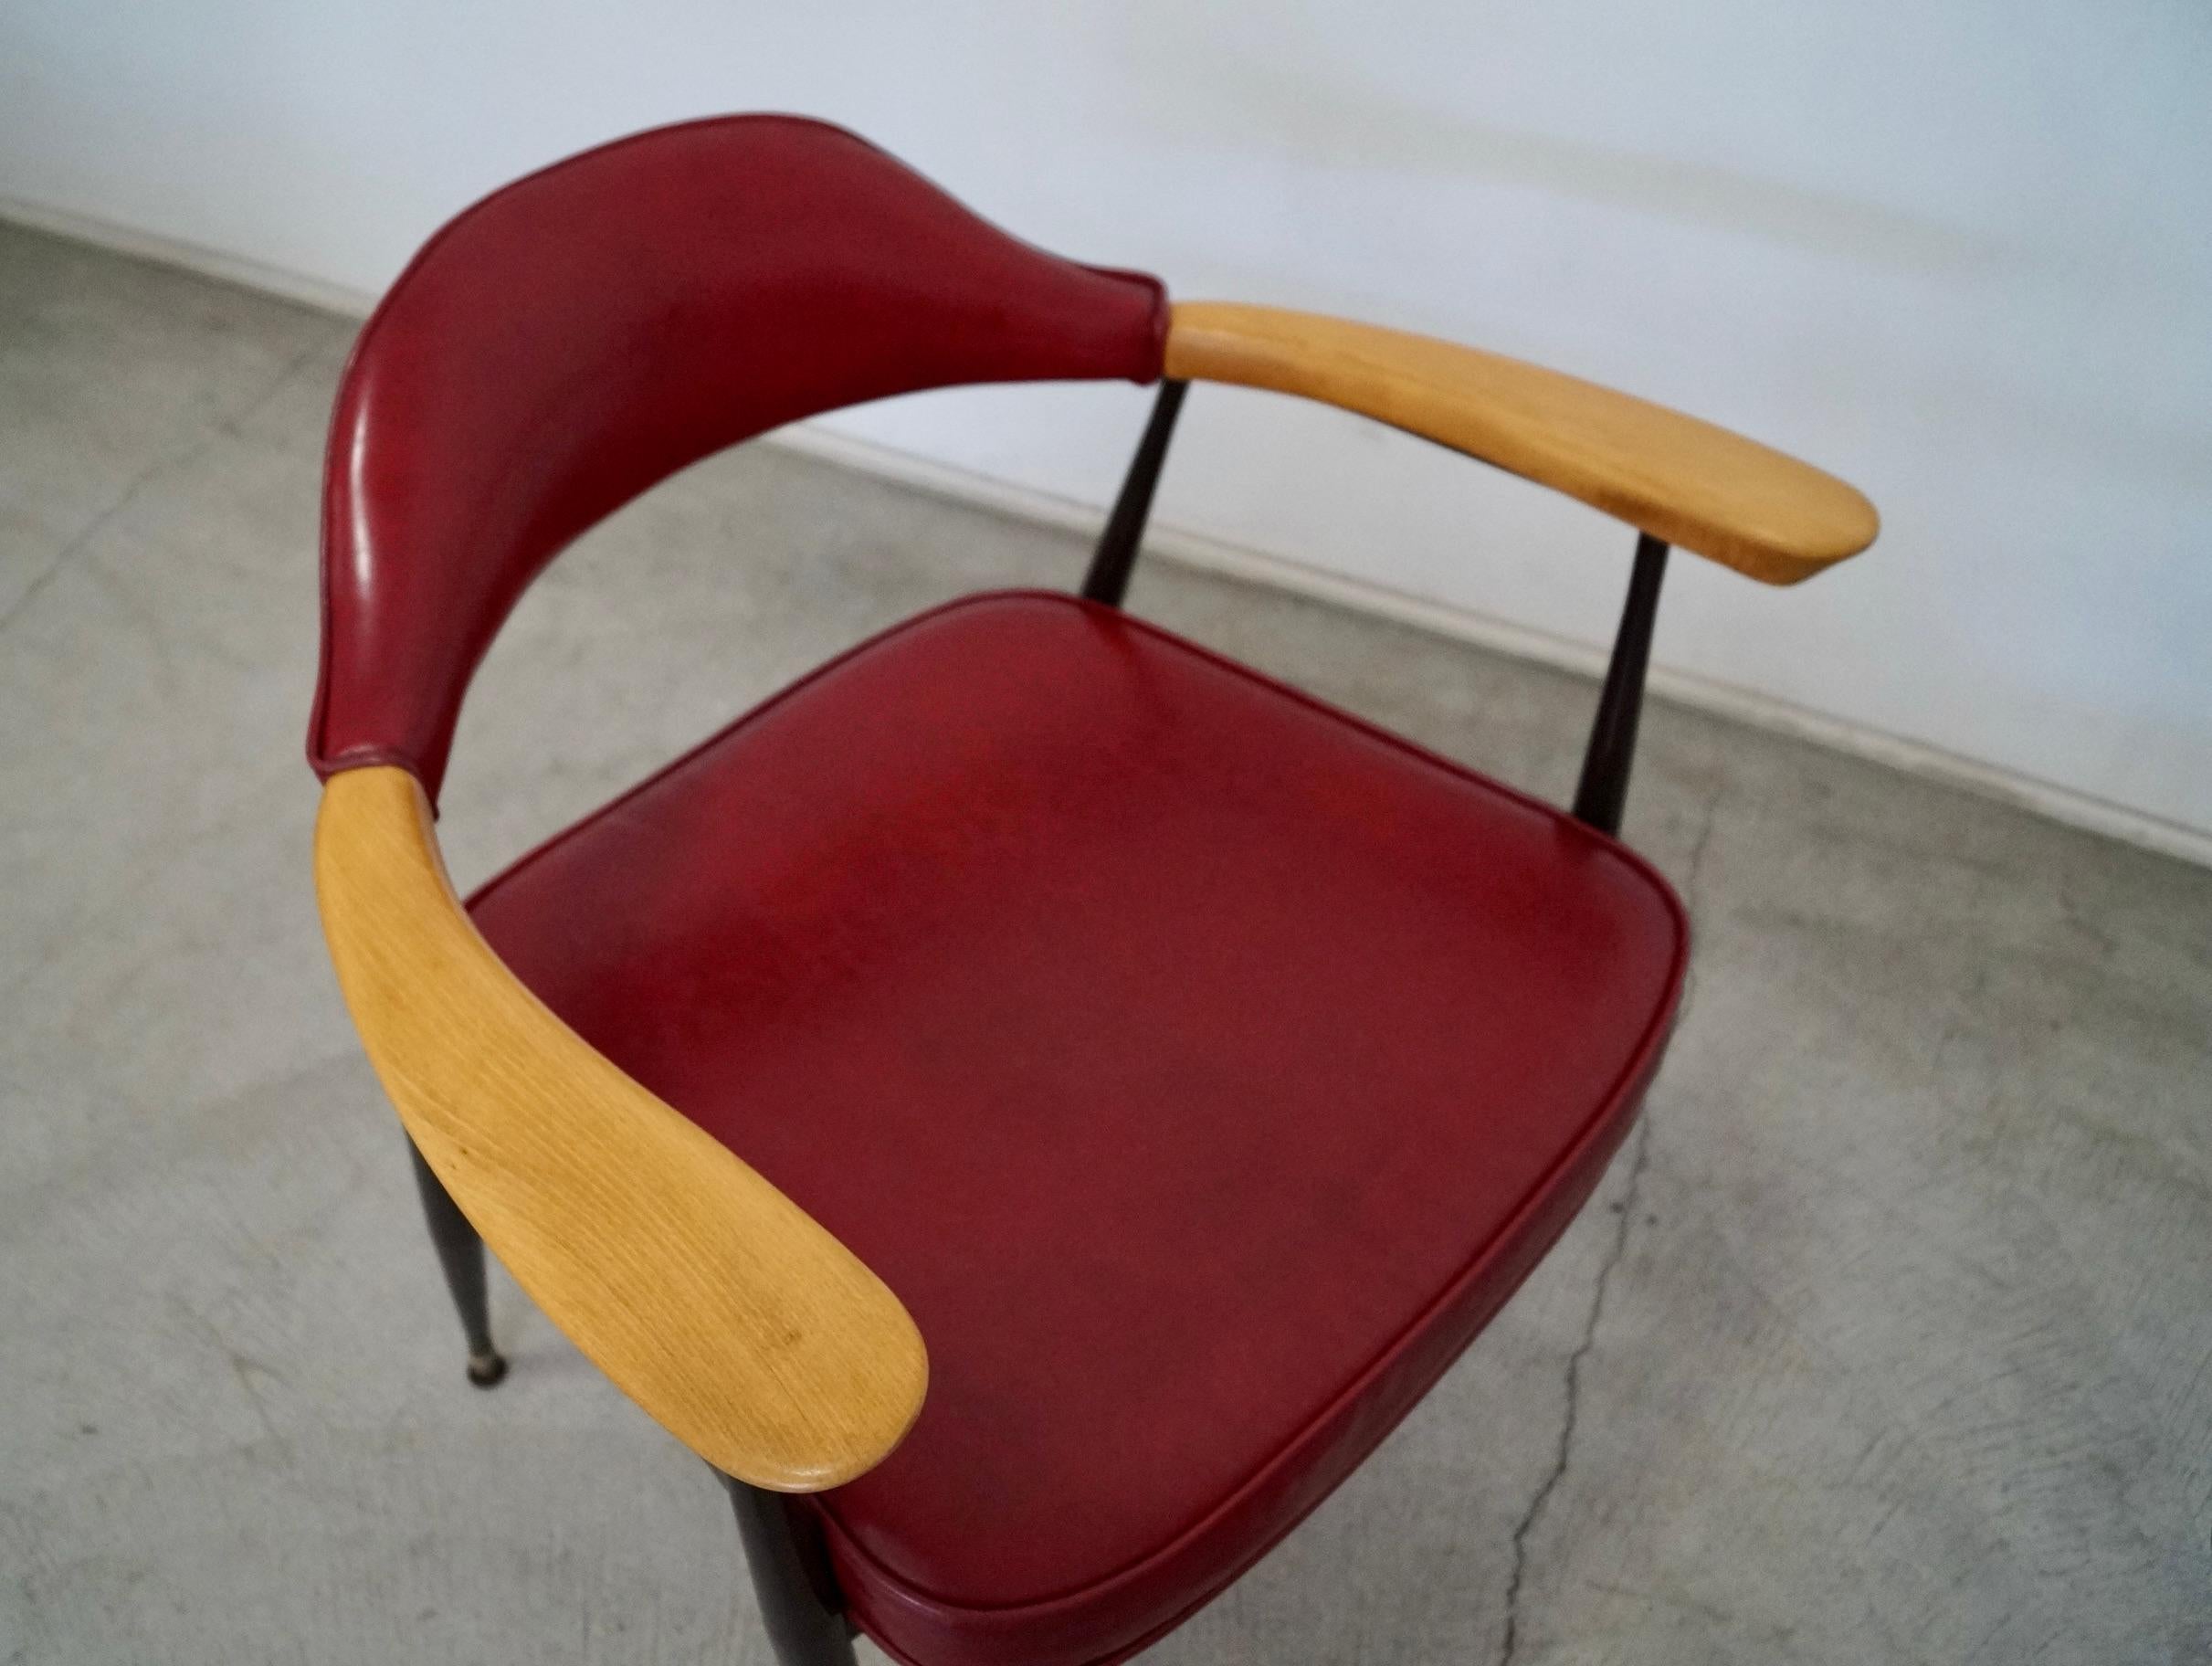 1970's Mid-Century Modern Metal & Wood Armchairs - a Pair For Sale 13